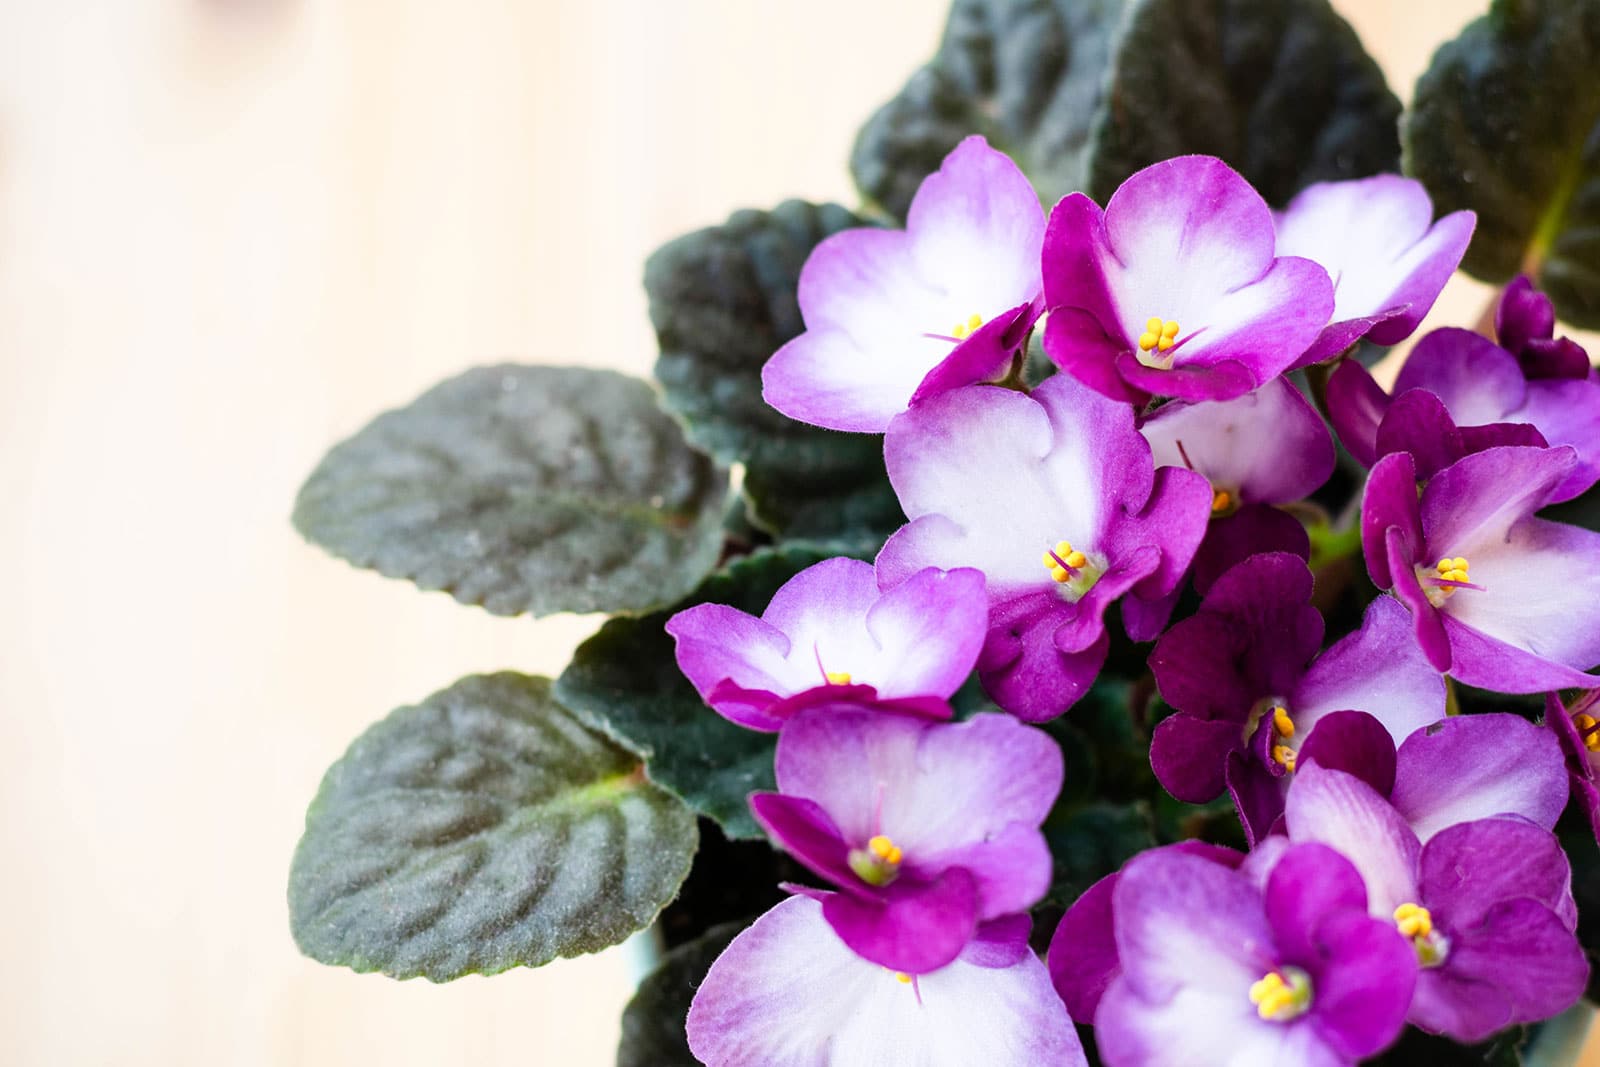 Close-up of purplish-pink and white African violet flowers with tiny yellow centers